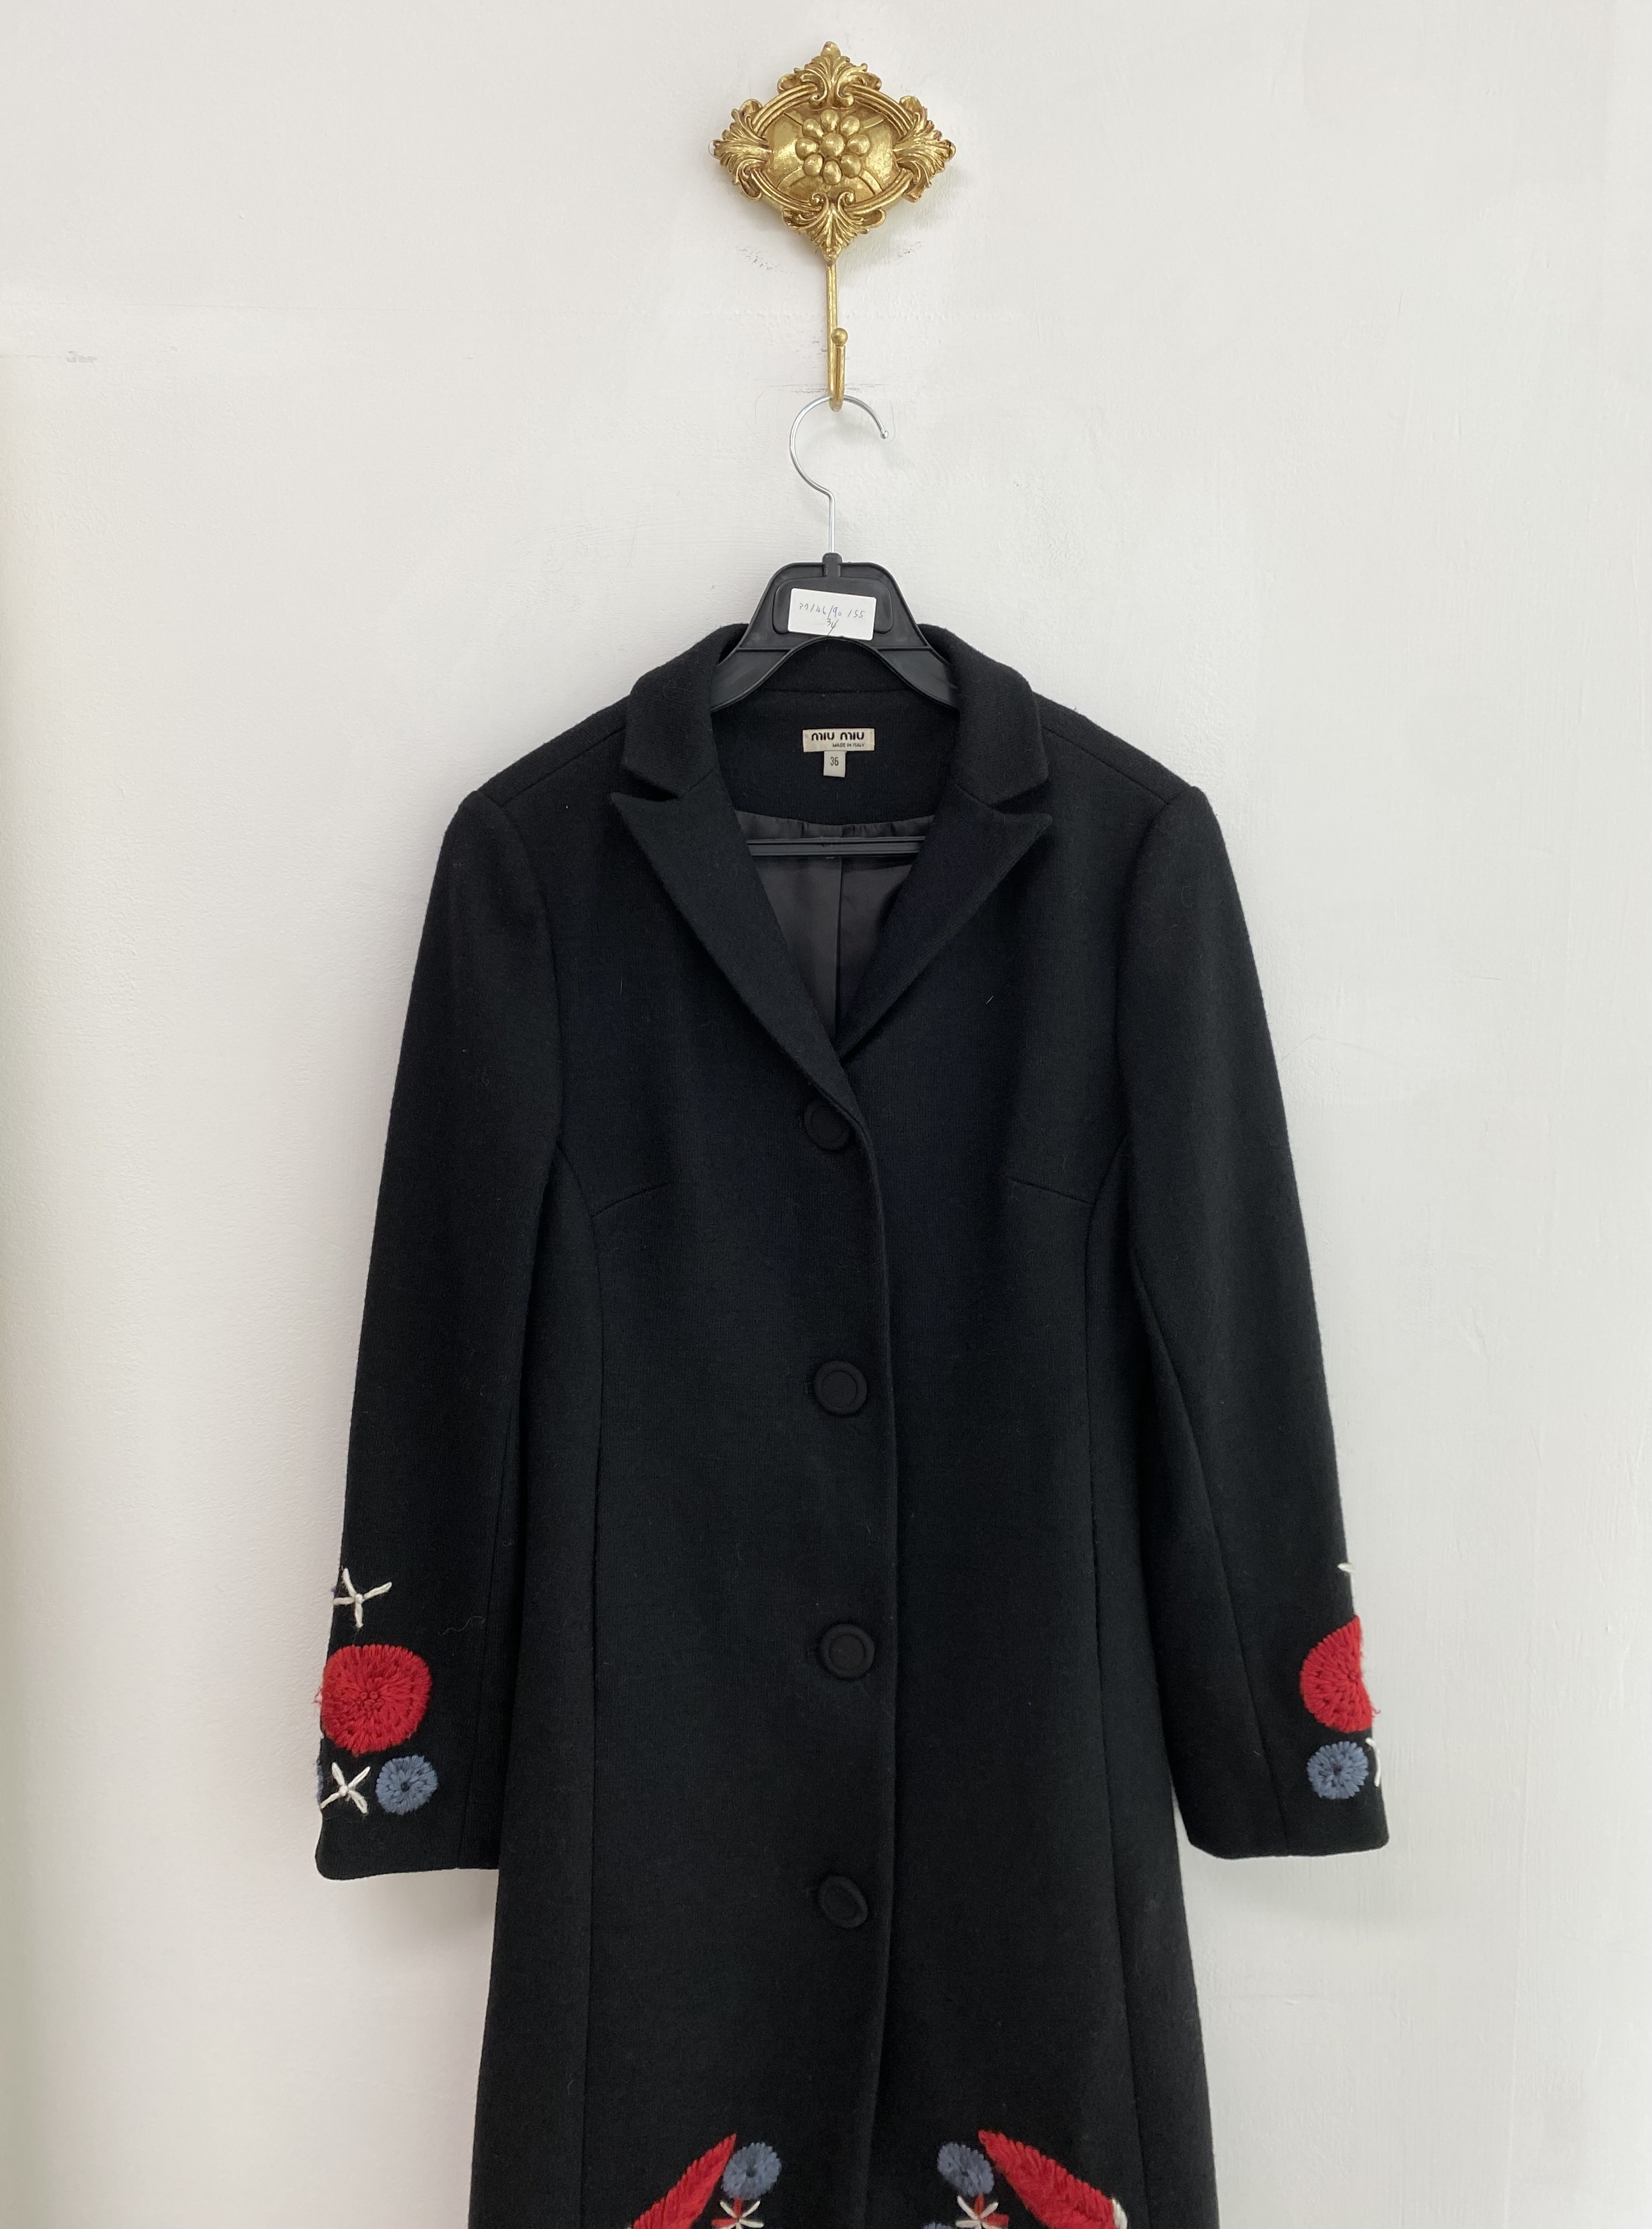 MIU MIU black embroidery point wool acrylic coat (made in italy)